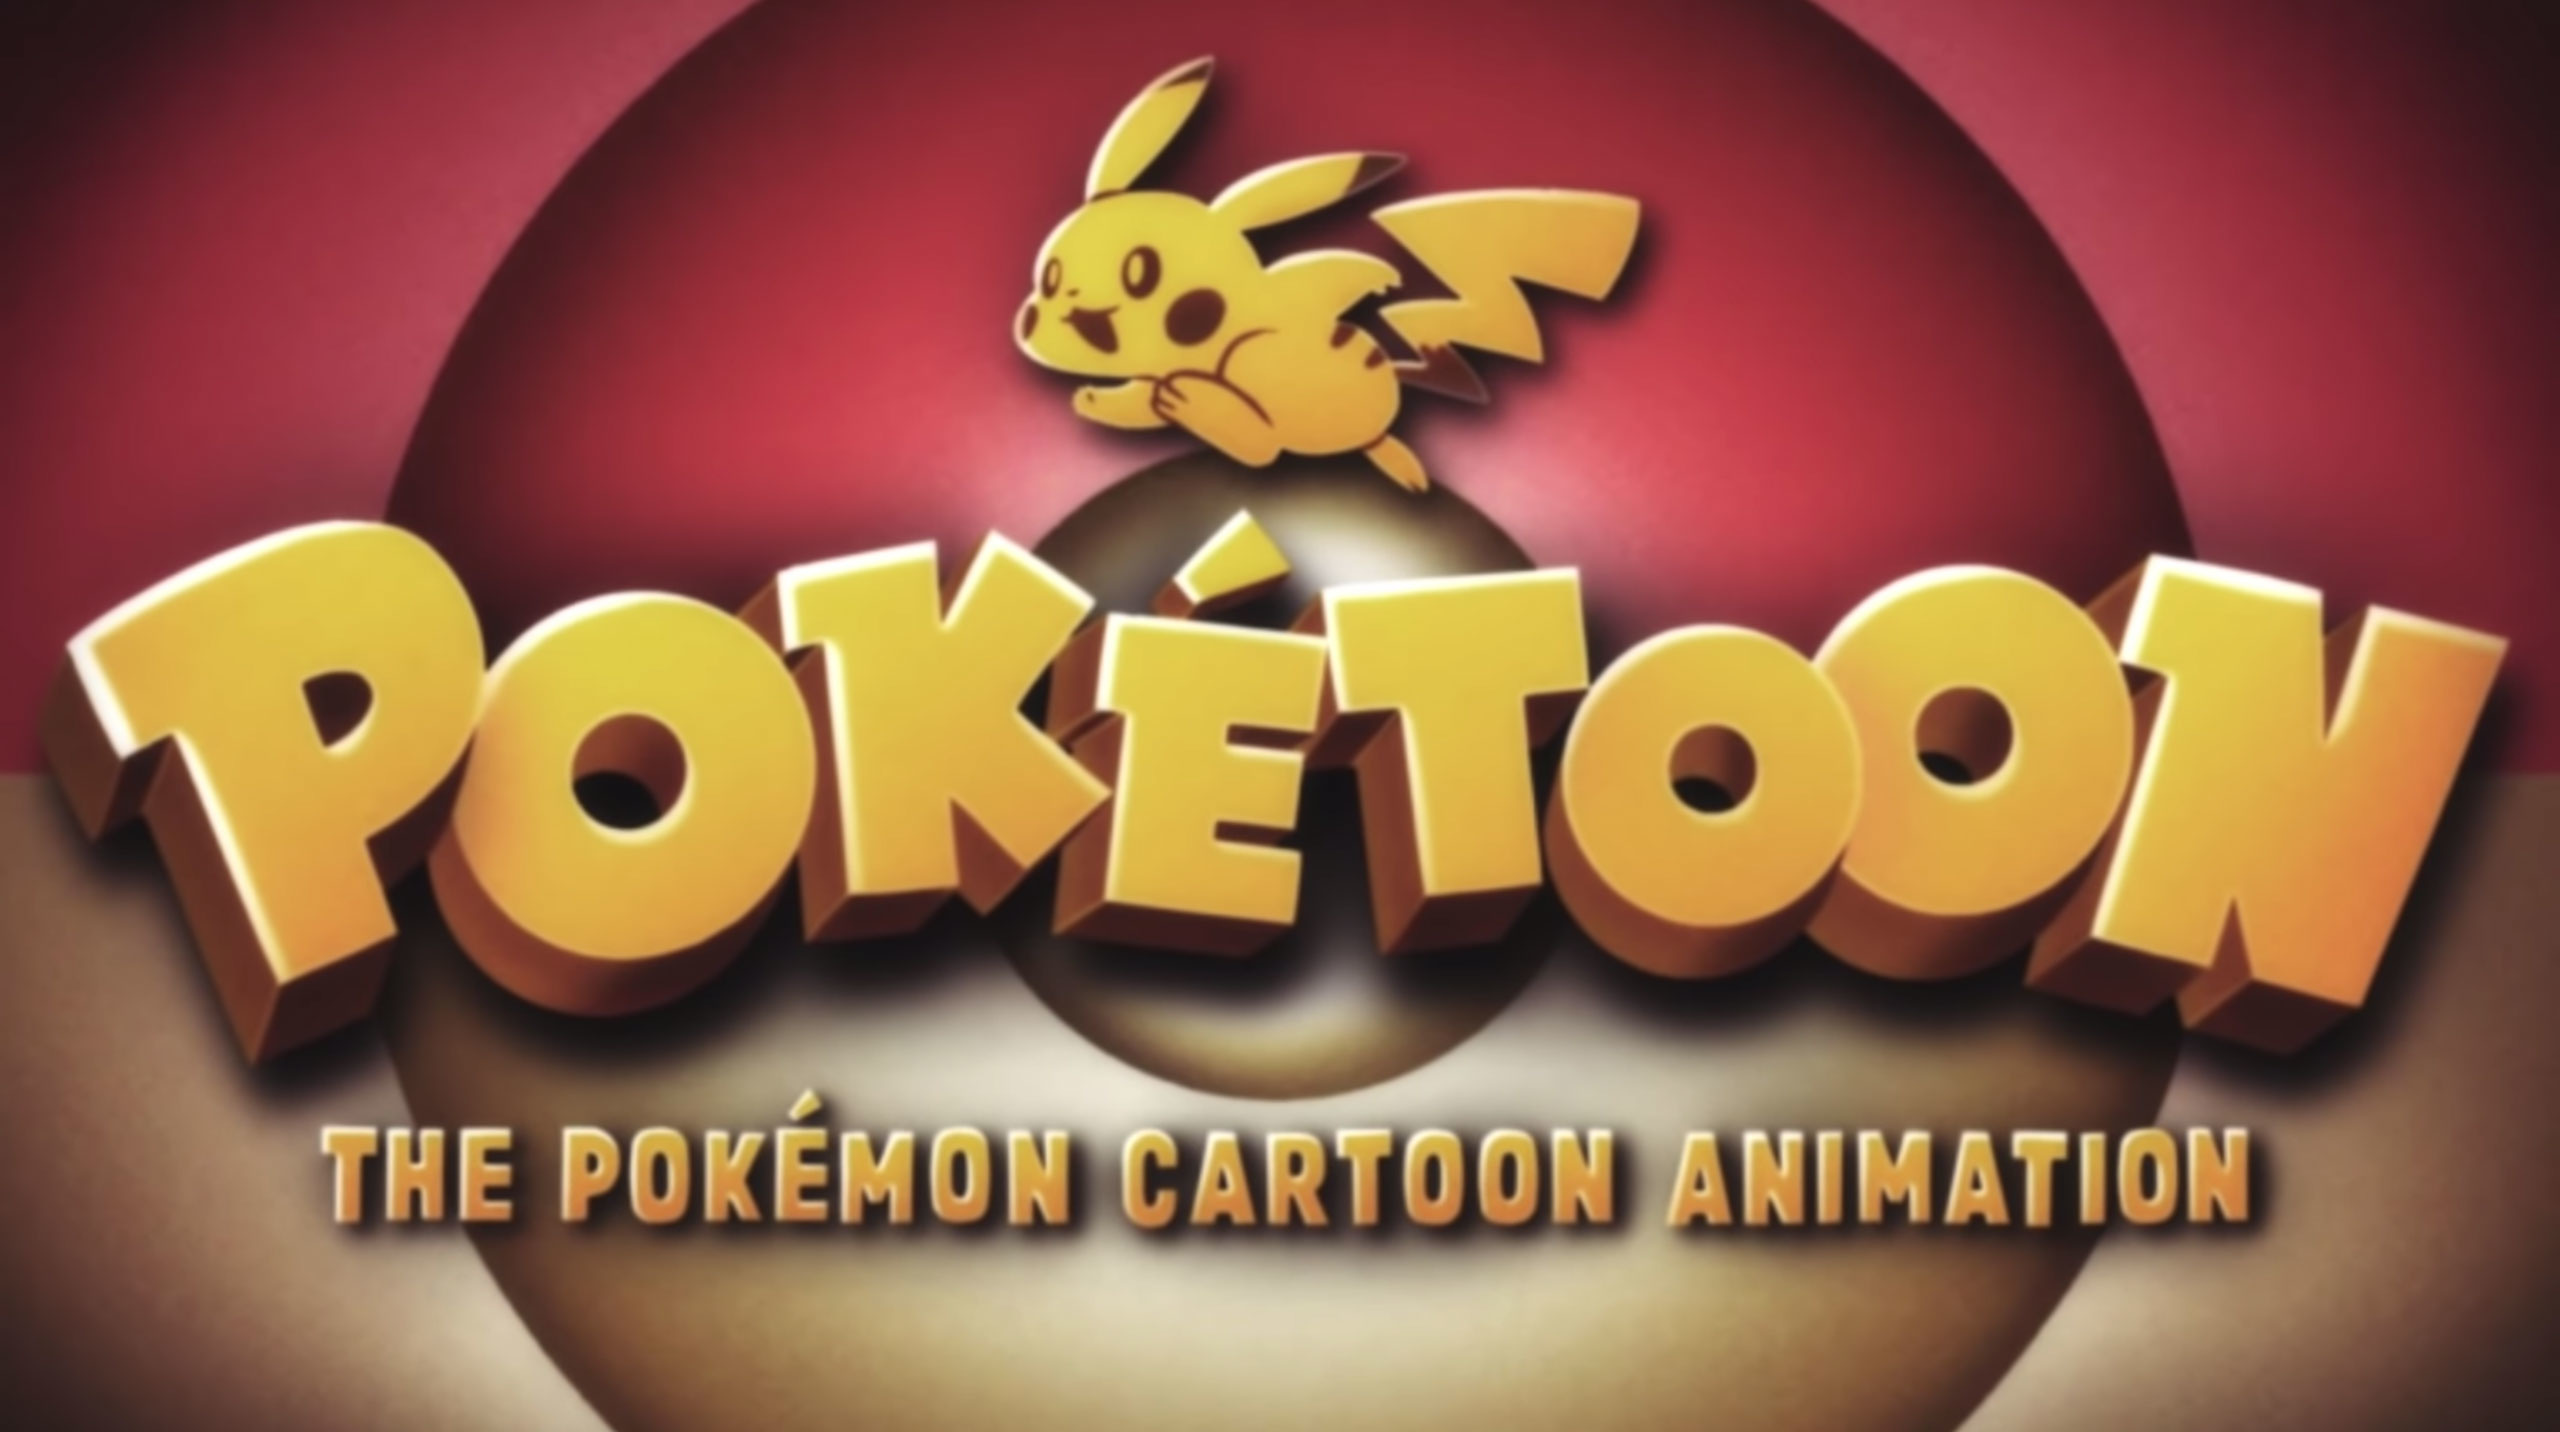 The most recent Pokémon short is praise to Looney Tunes